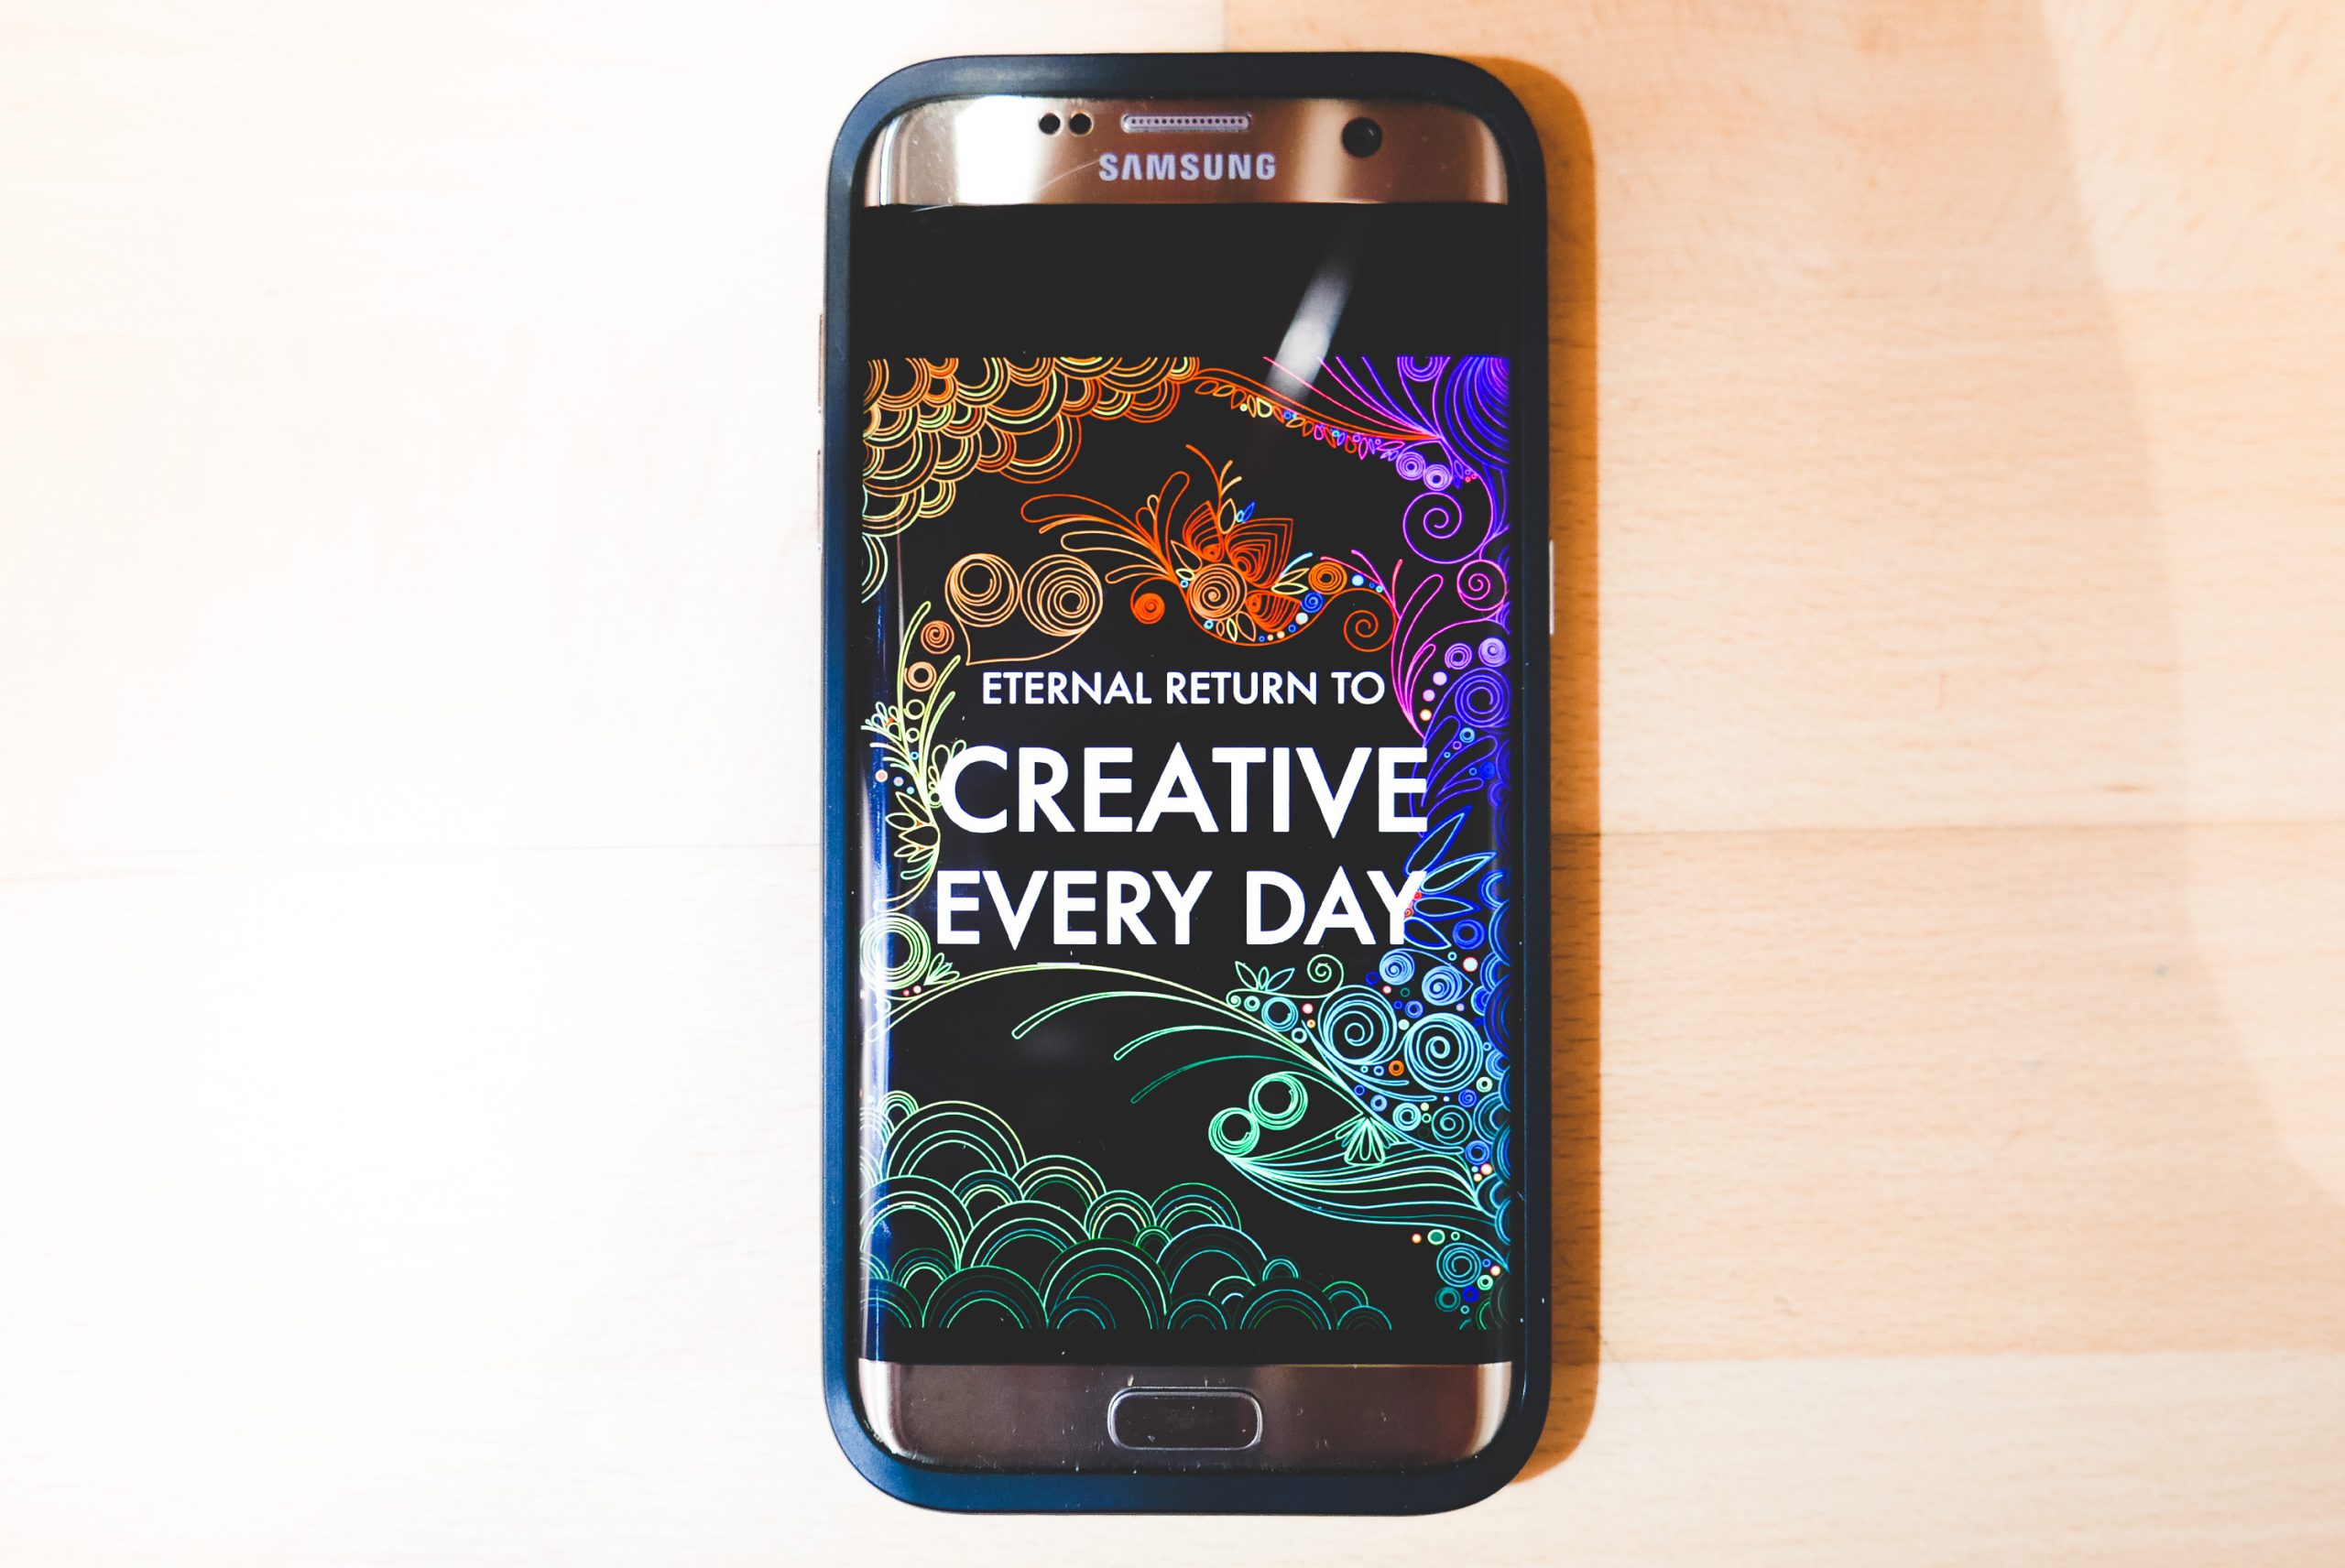 CREATIVE EVERY DAY MOBILE